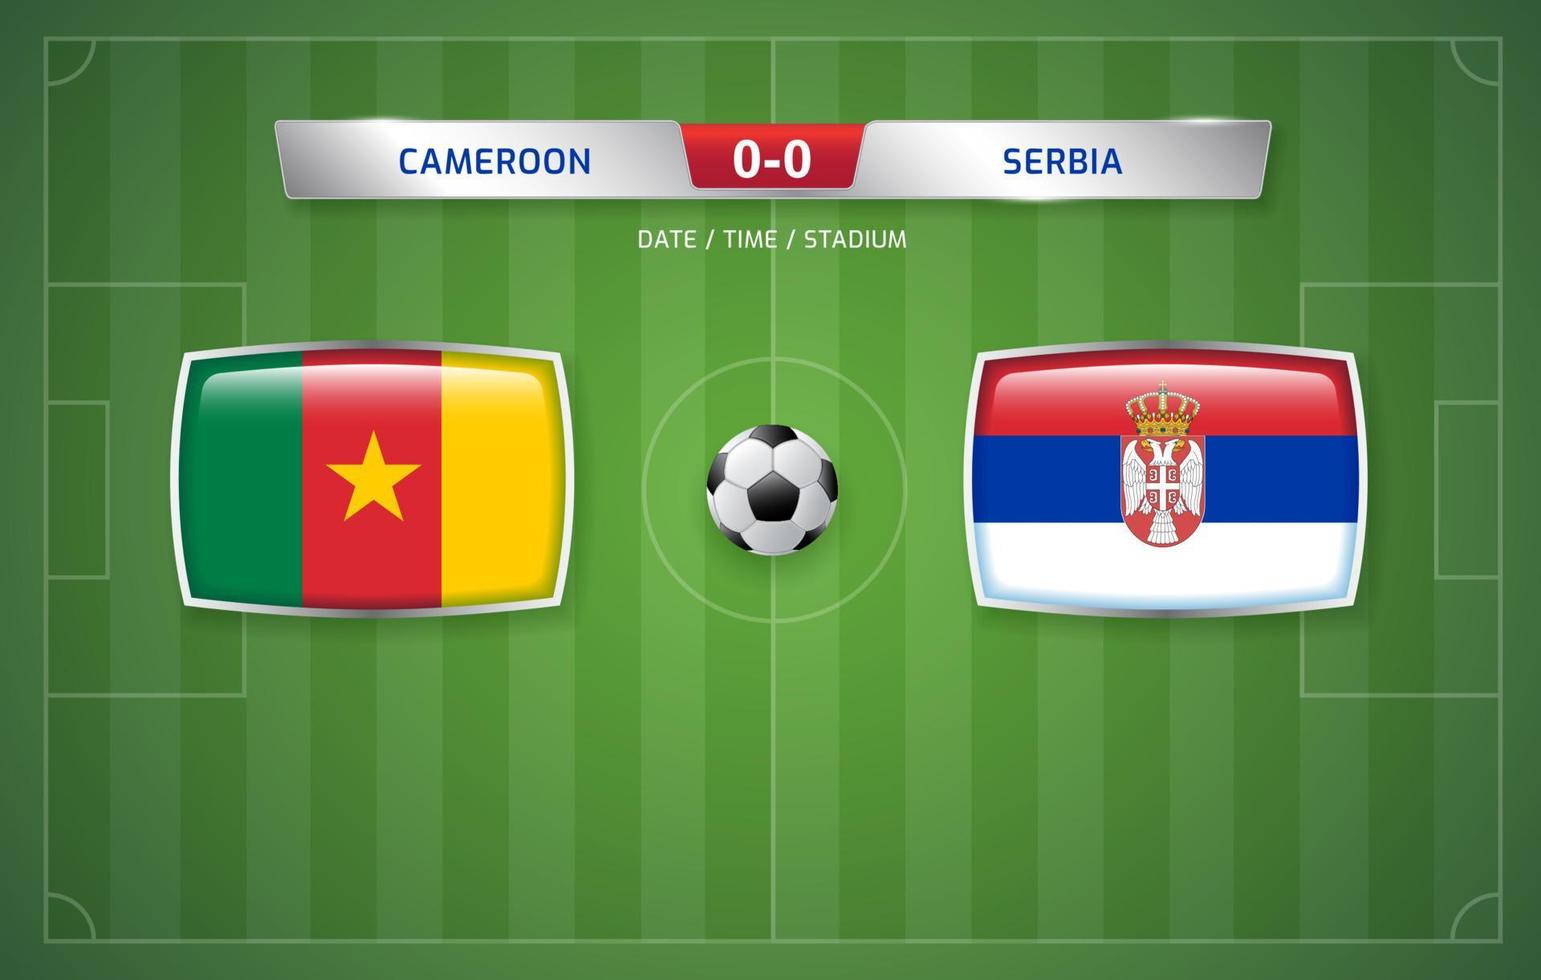 Cameroon vs Serbia scoreboard broadcast template for sport soccer tournament 2022 and football championship vector illustration